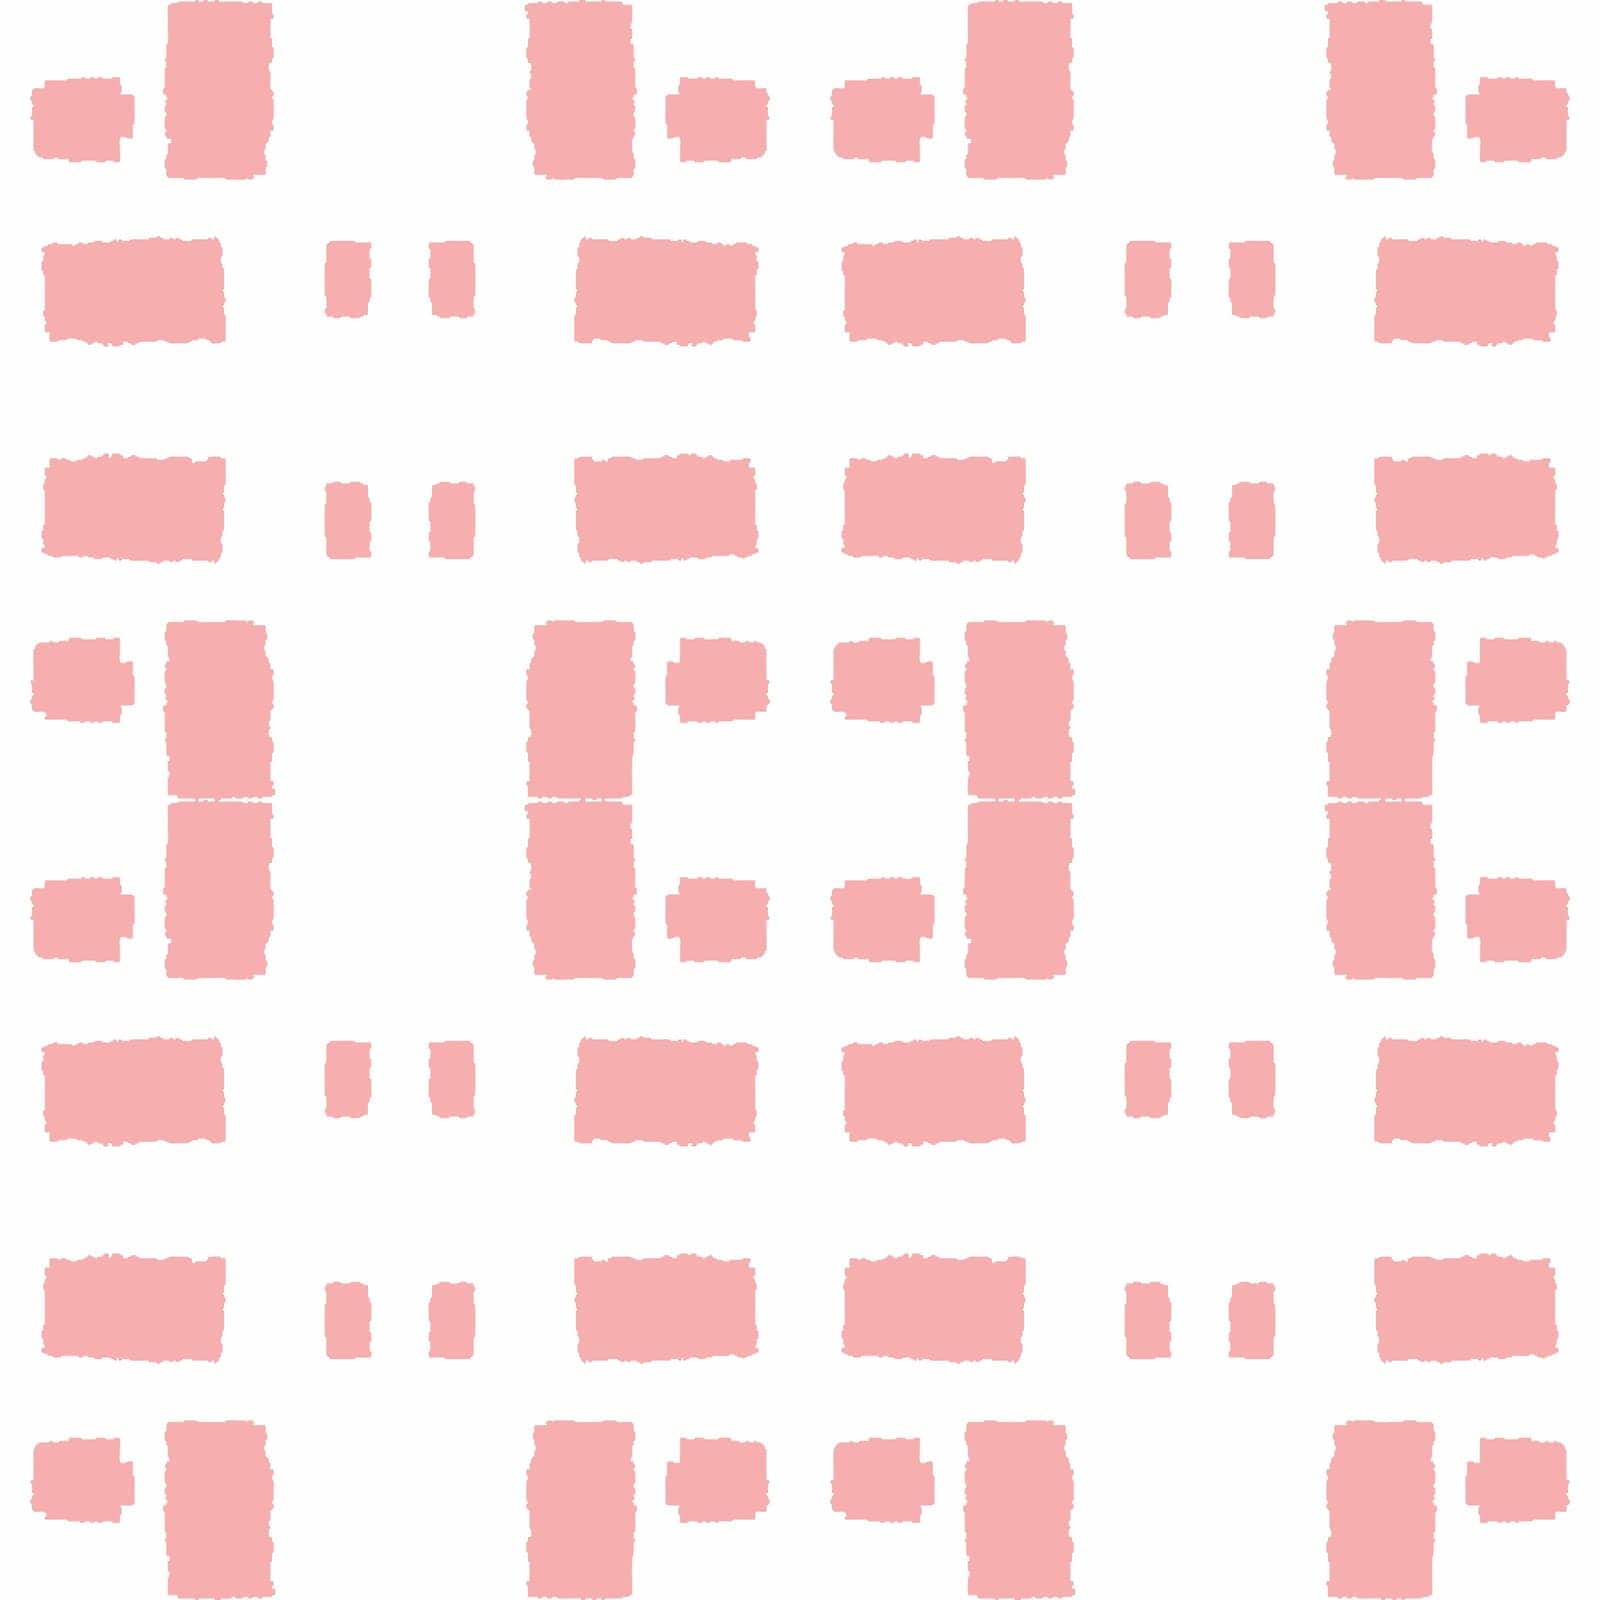 Pink rectangles in the form of tile seamless pattern by Dustick